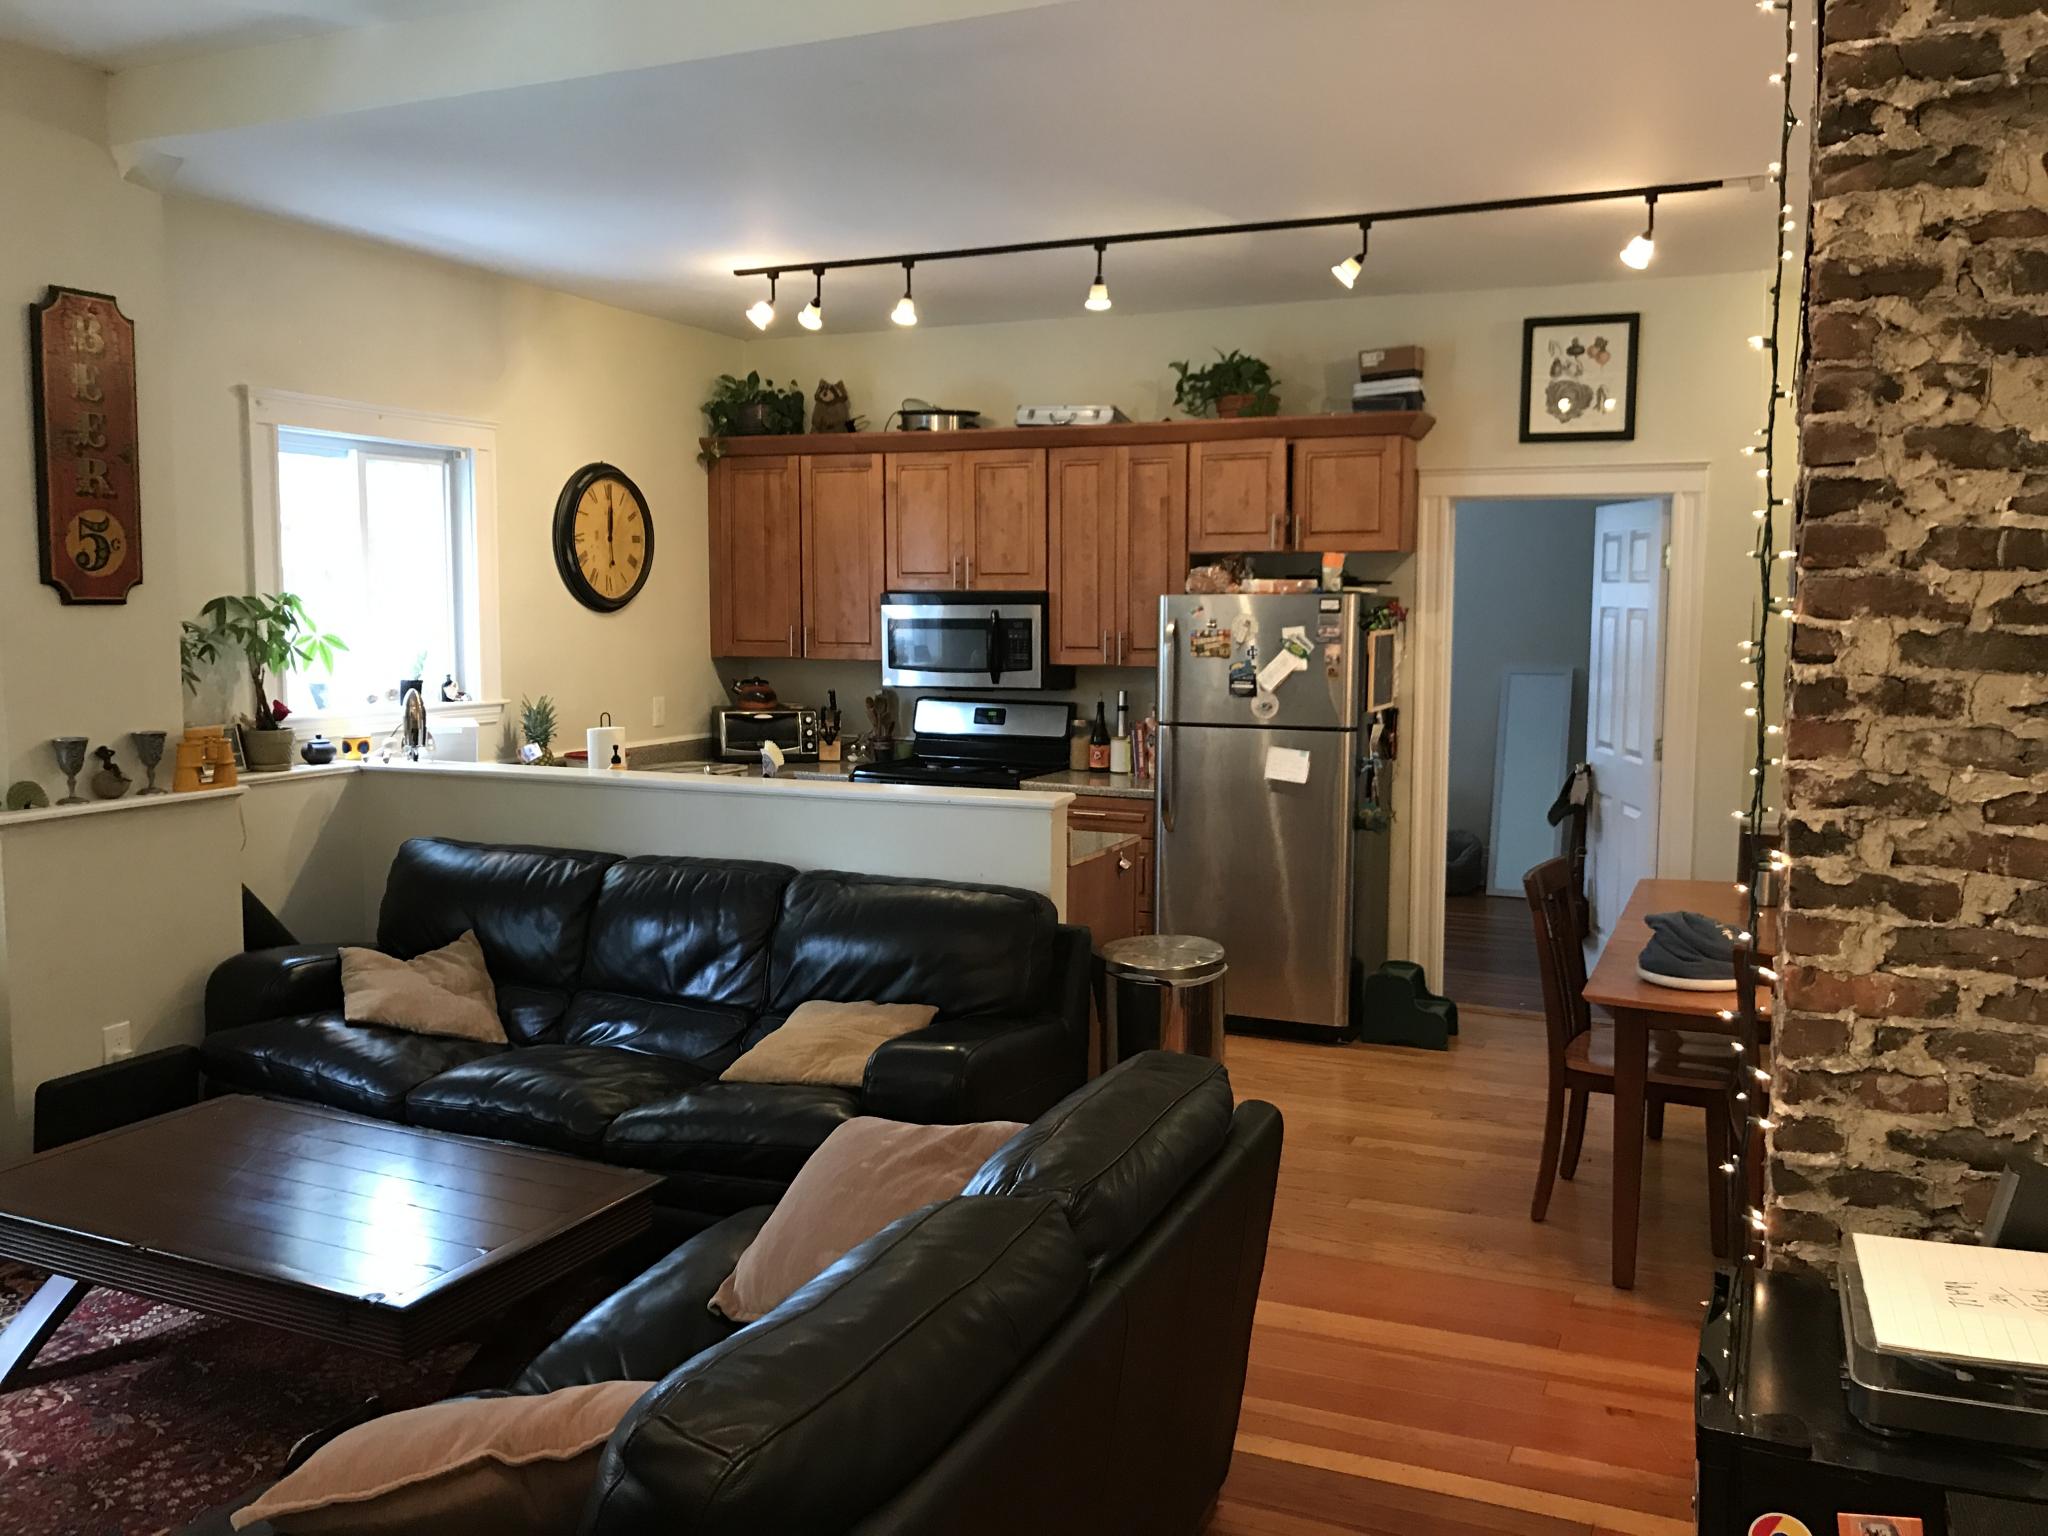 Photos of apartment on School,Somerville MA 02145